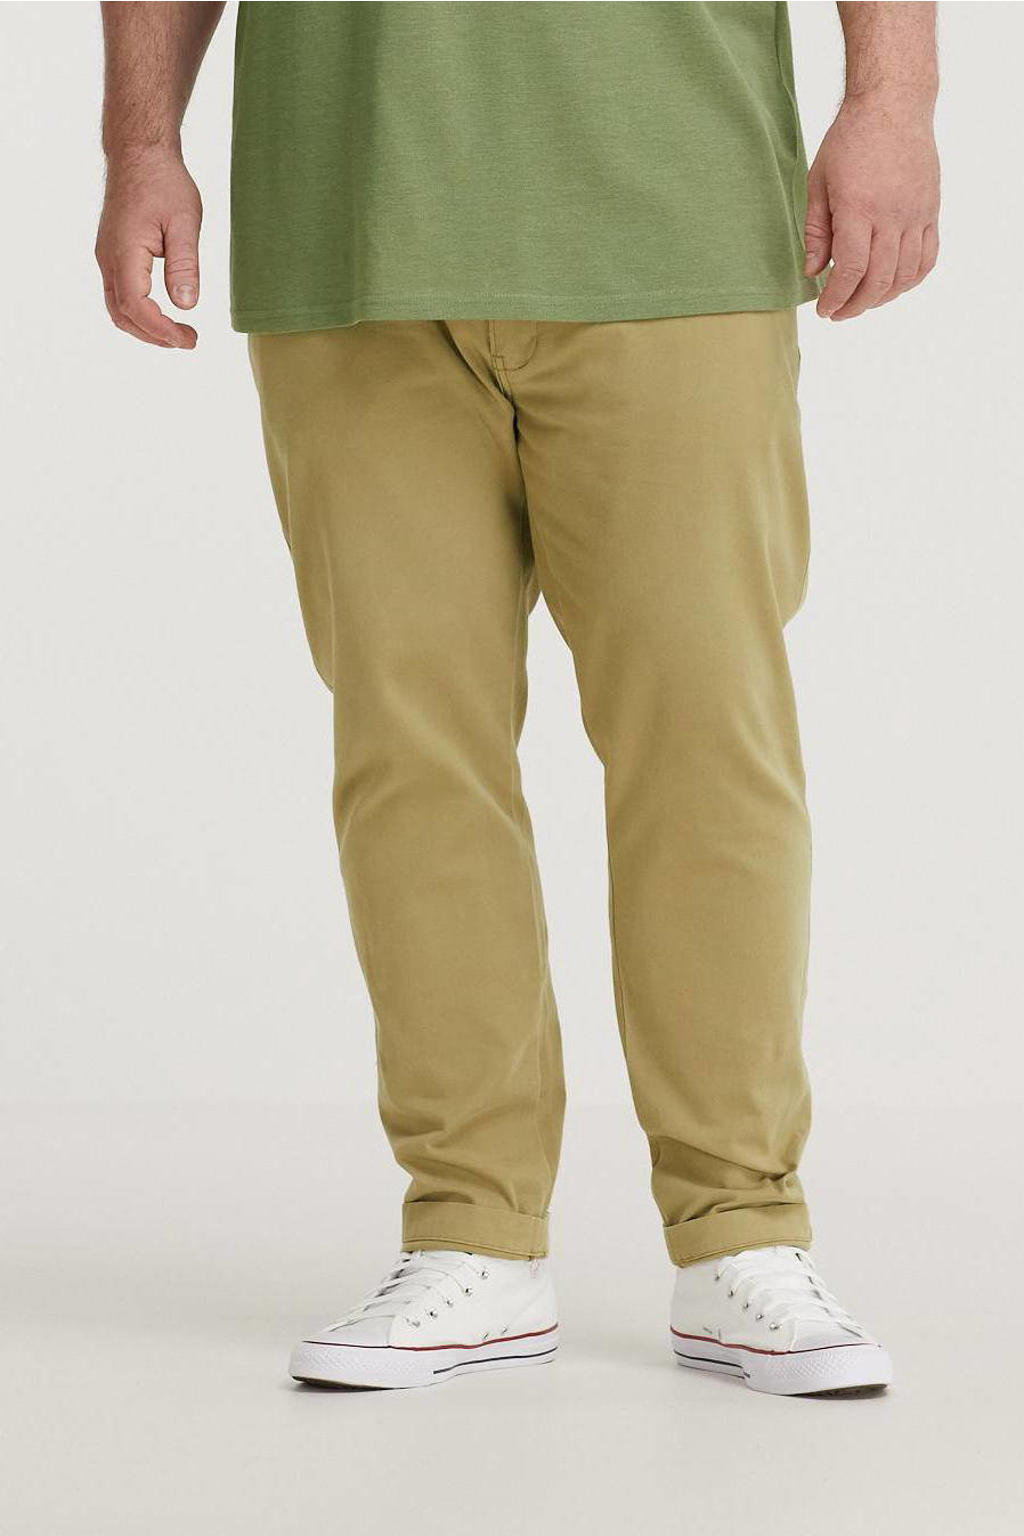 Levi's Big and Tall regular fit chino Plus Size beige